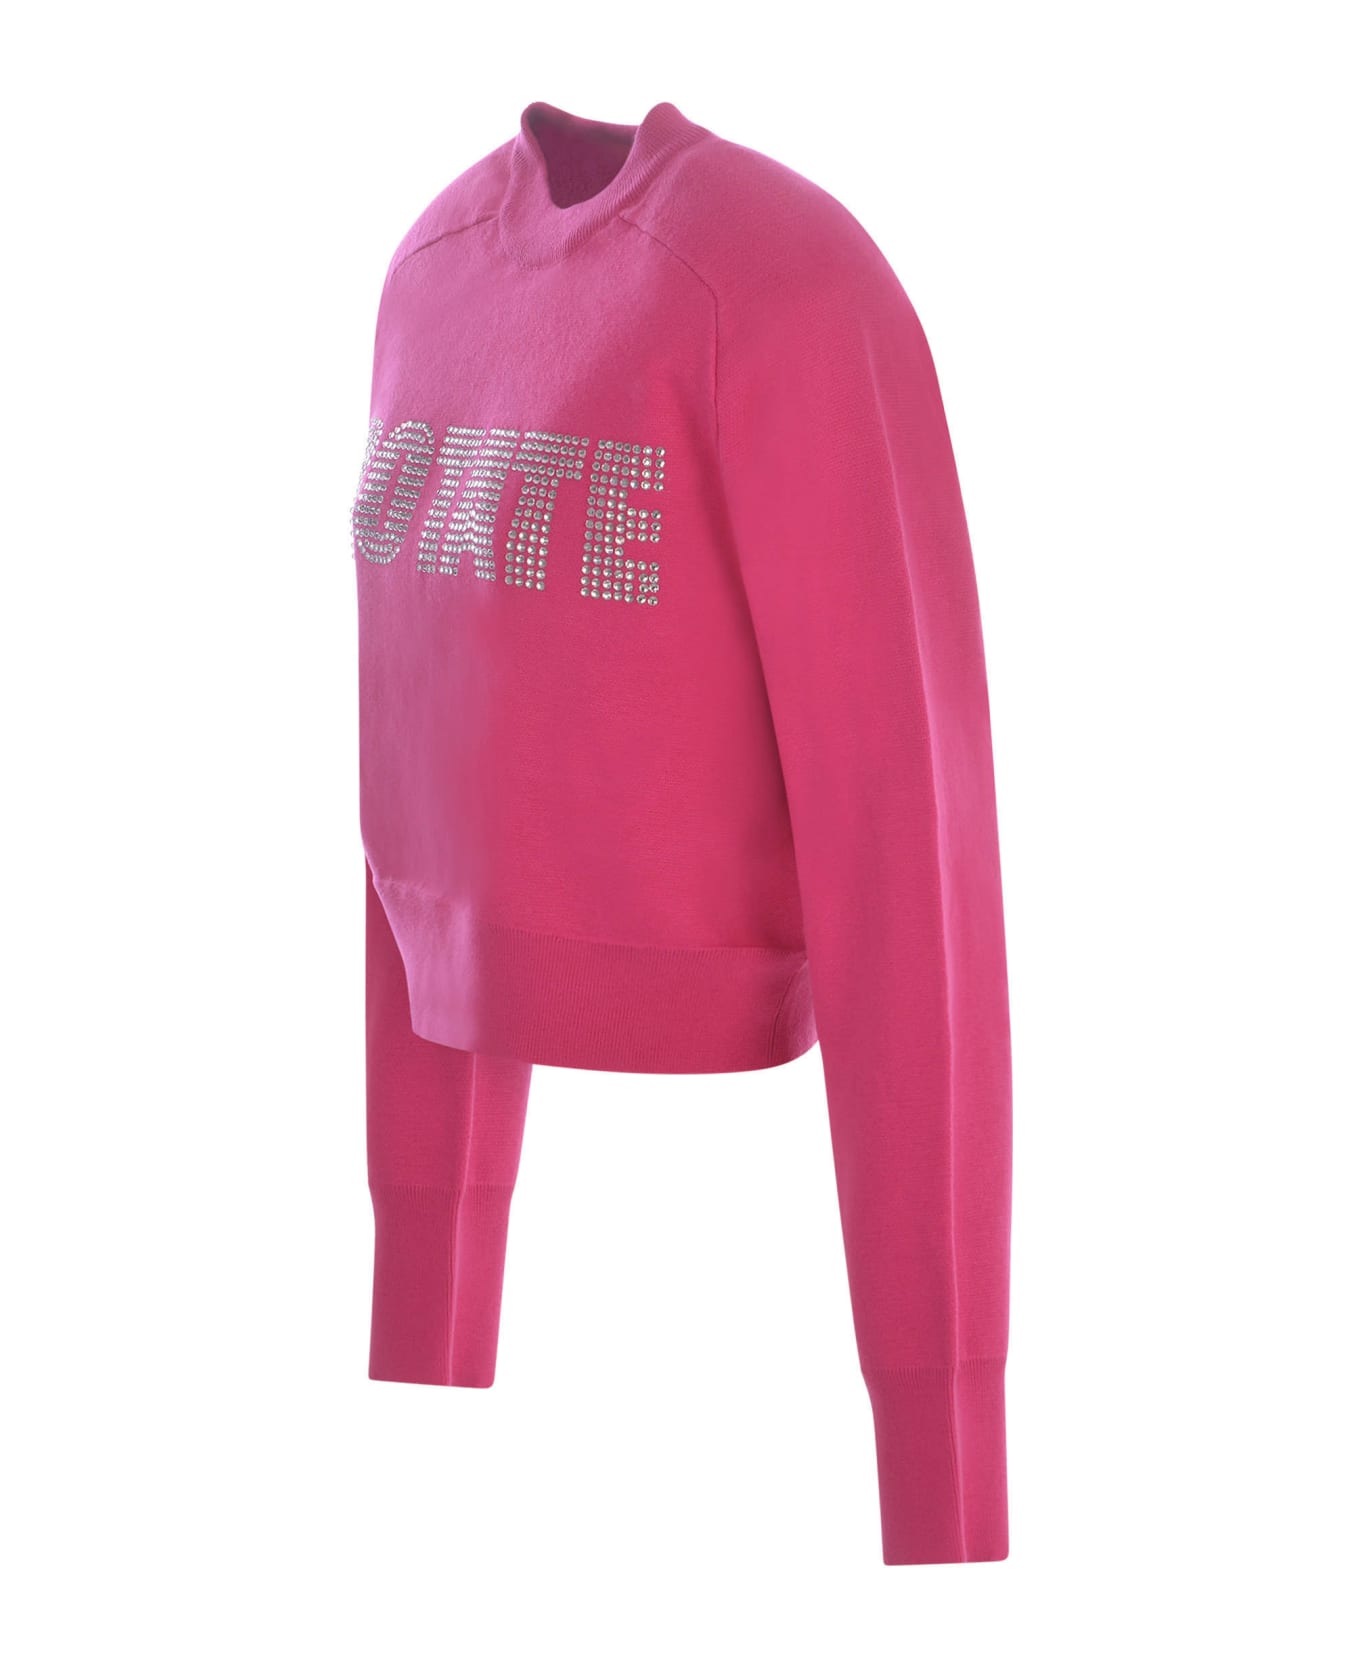 Rotate by Birger Christensen Sweatshirt Rotate In Cotton And Cashmere Blend - Fucsia フリース